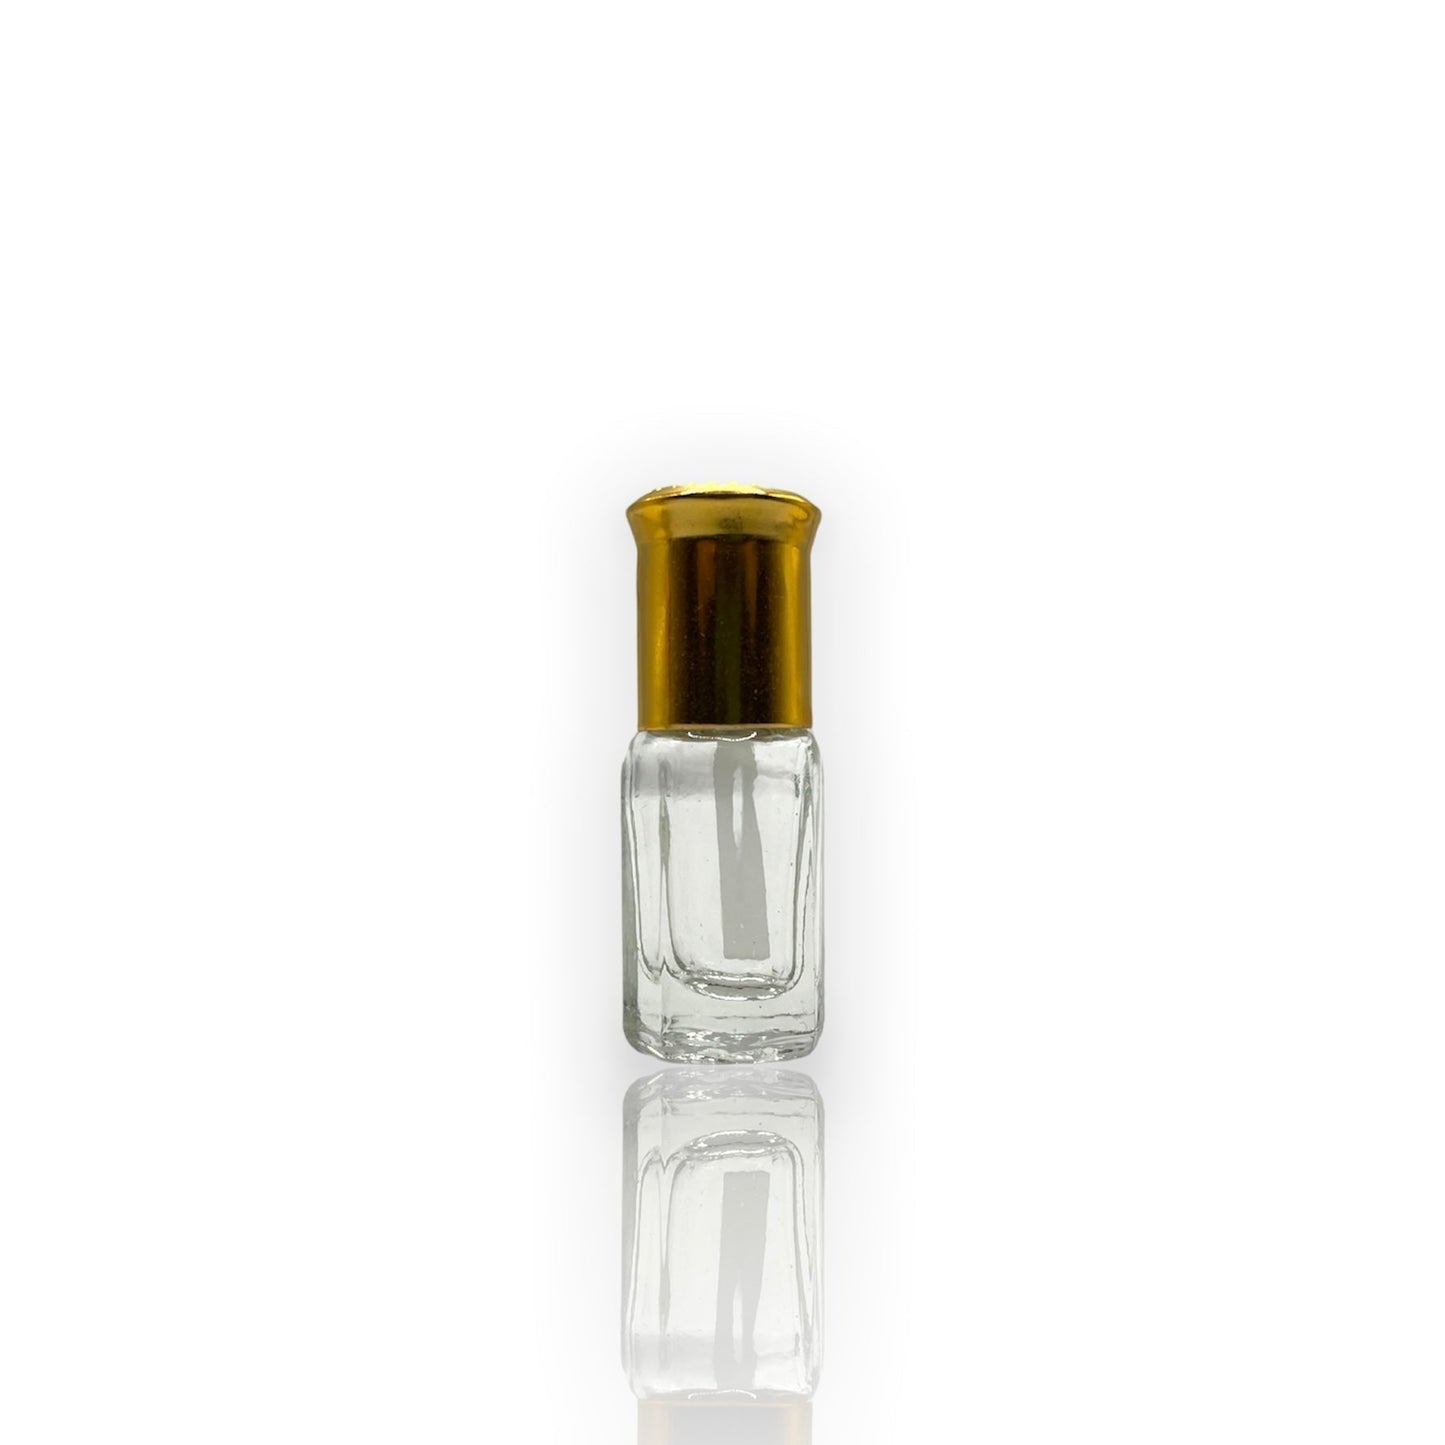 F-10 Oil Perfume *Inspired by Chanel Chance